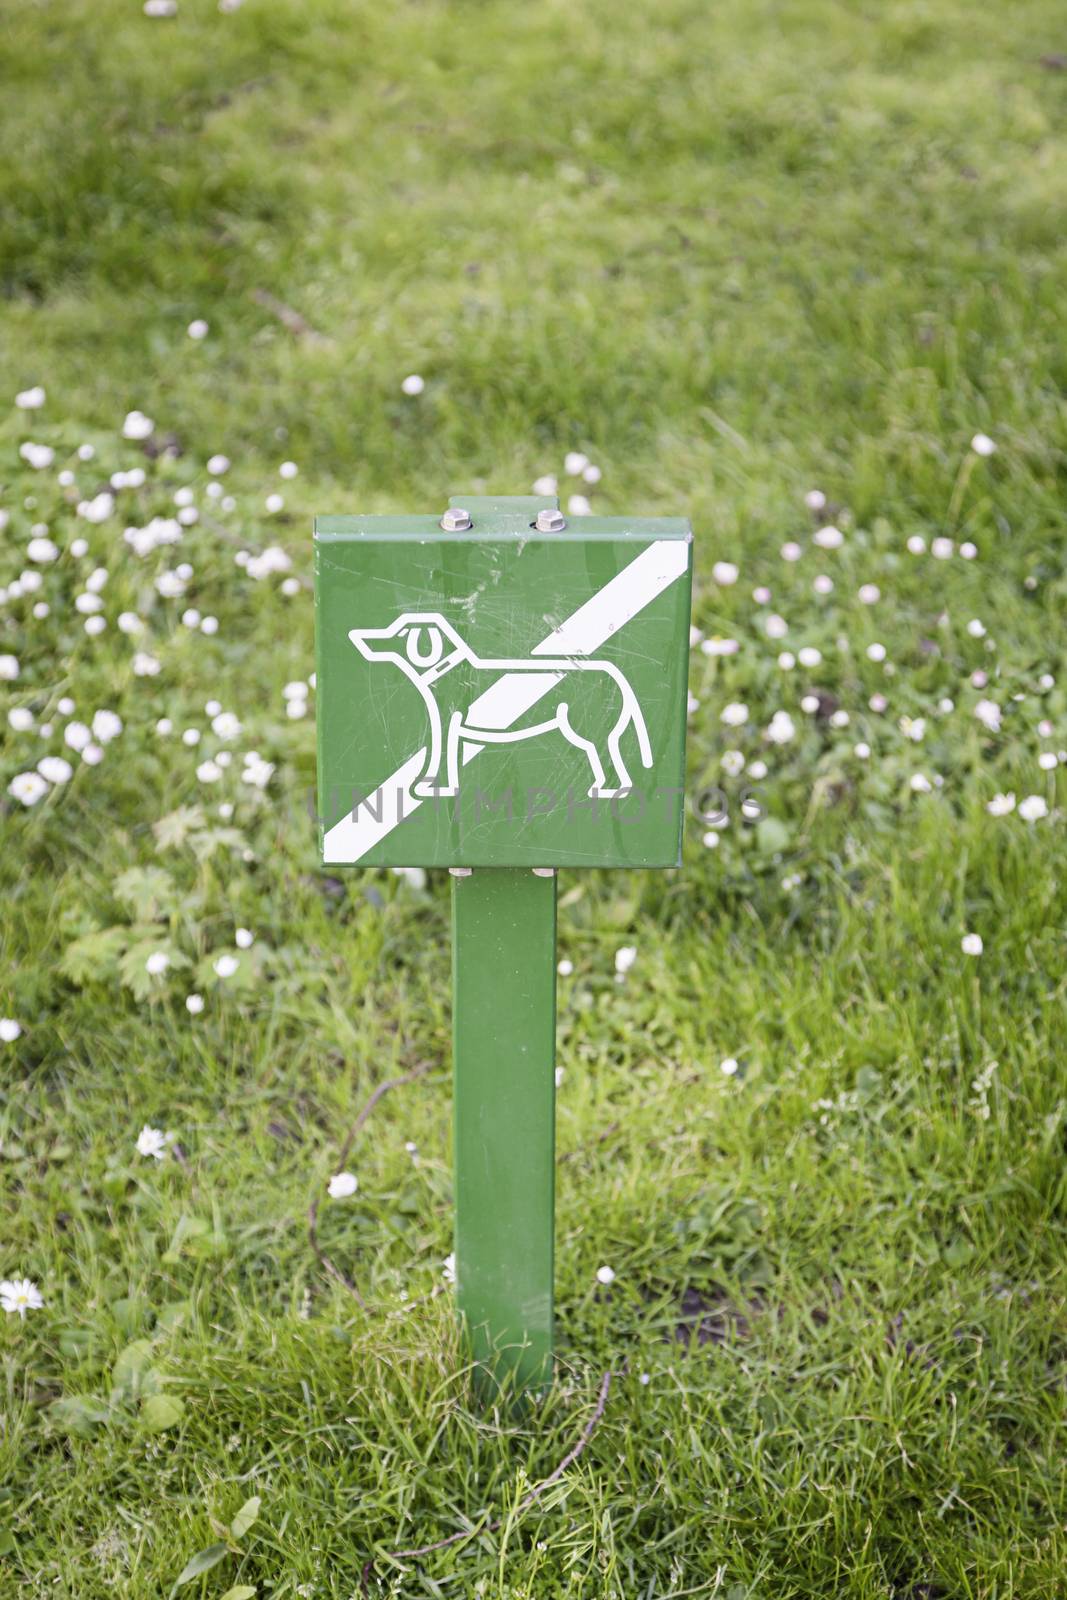 Signal banned dogs in the grass by esebene